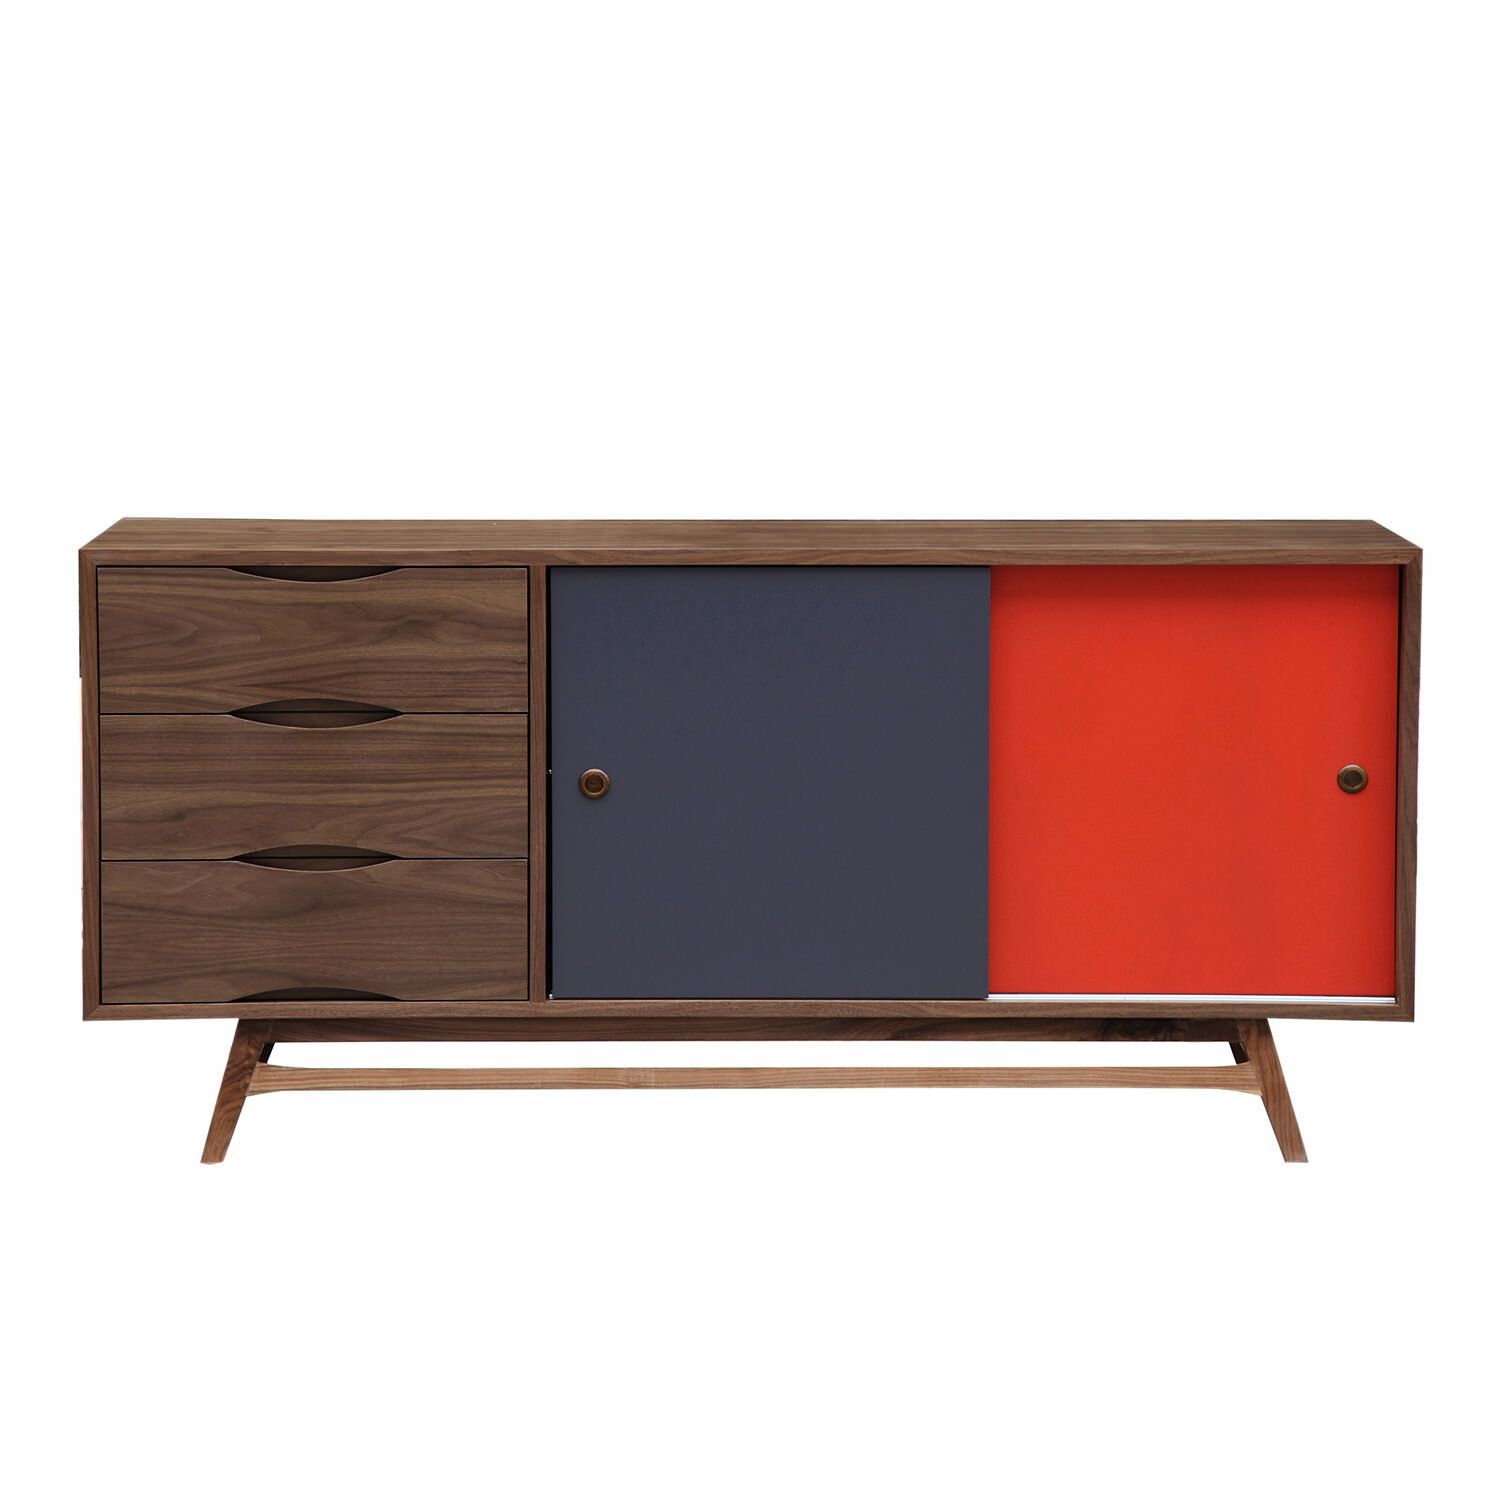 Color Pop Series Credenza Throughout Bright Angles Credenzas (View 6 of 30)